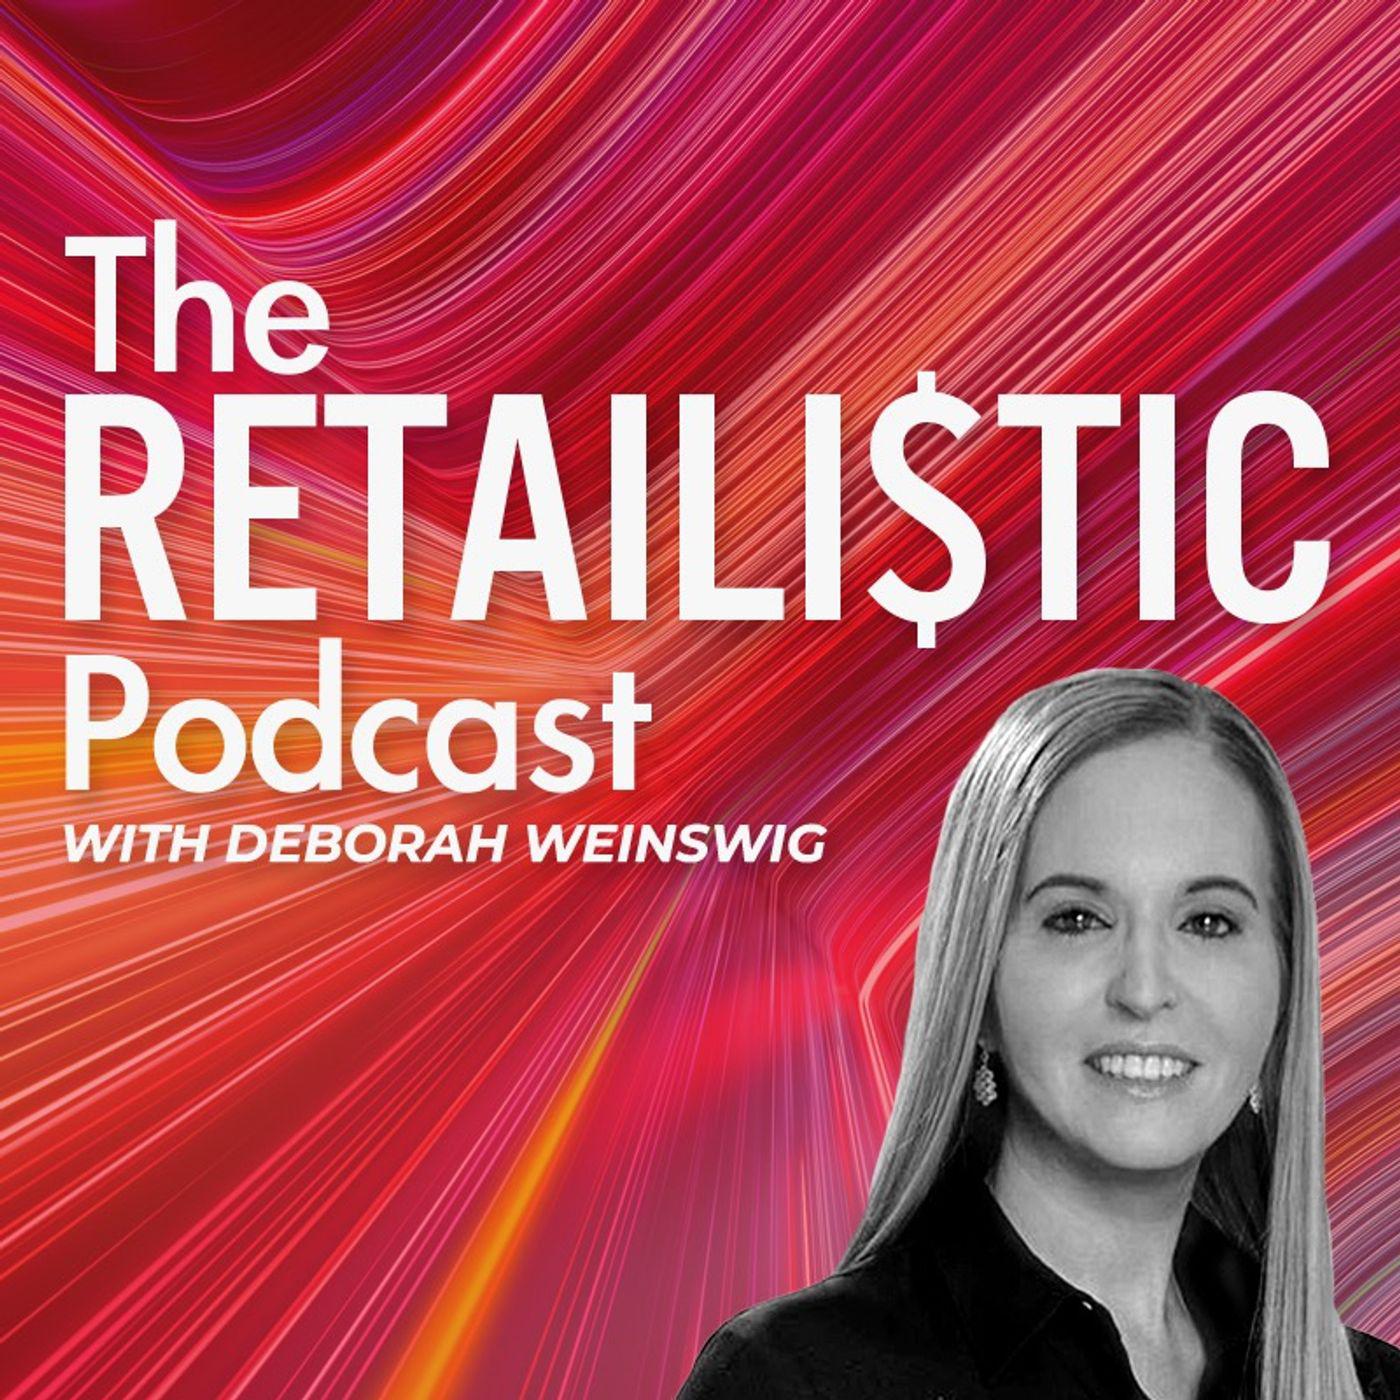 The Realistic Podcast with Deborah Weinswig